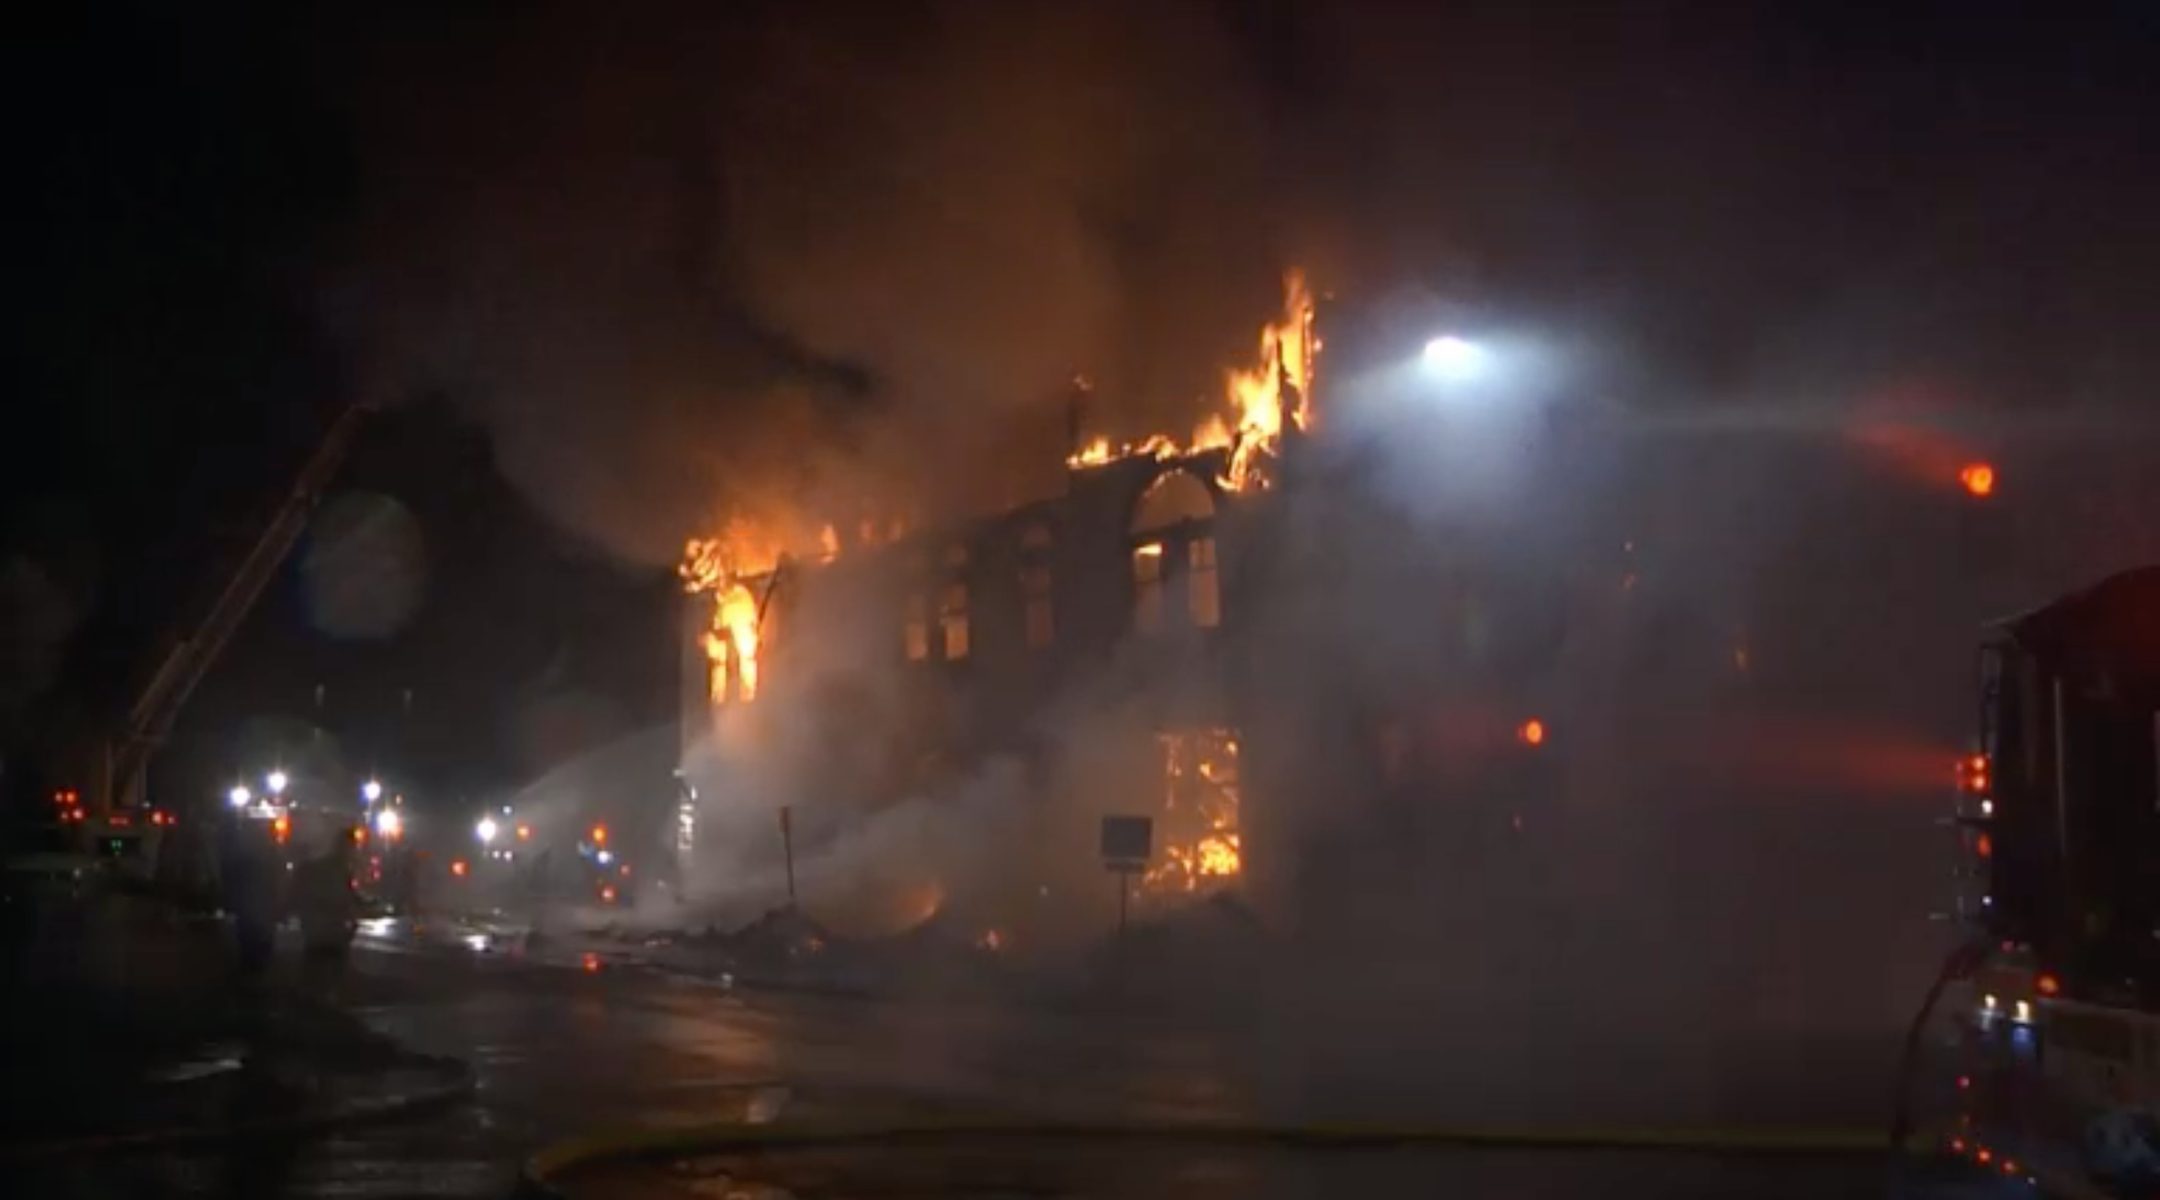 Adas Israel Congregation went up in flames early Monday morning. The cause of the fire is unclear. (Screenshot from KBJR Channel 6)